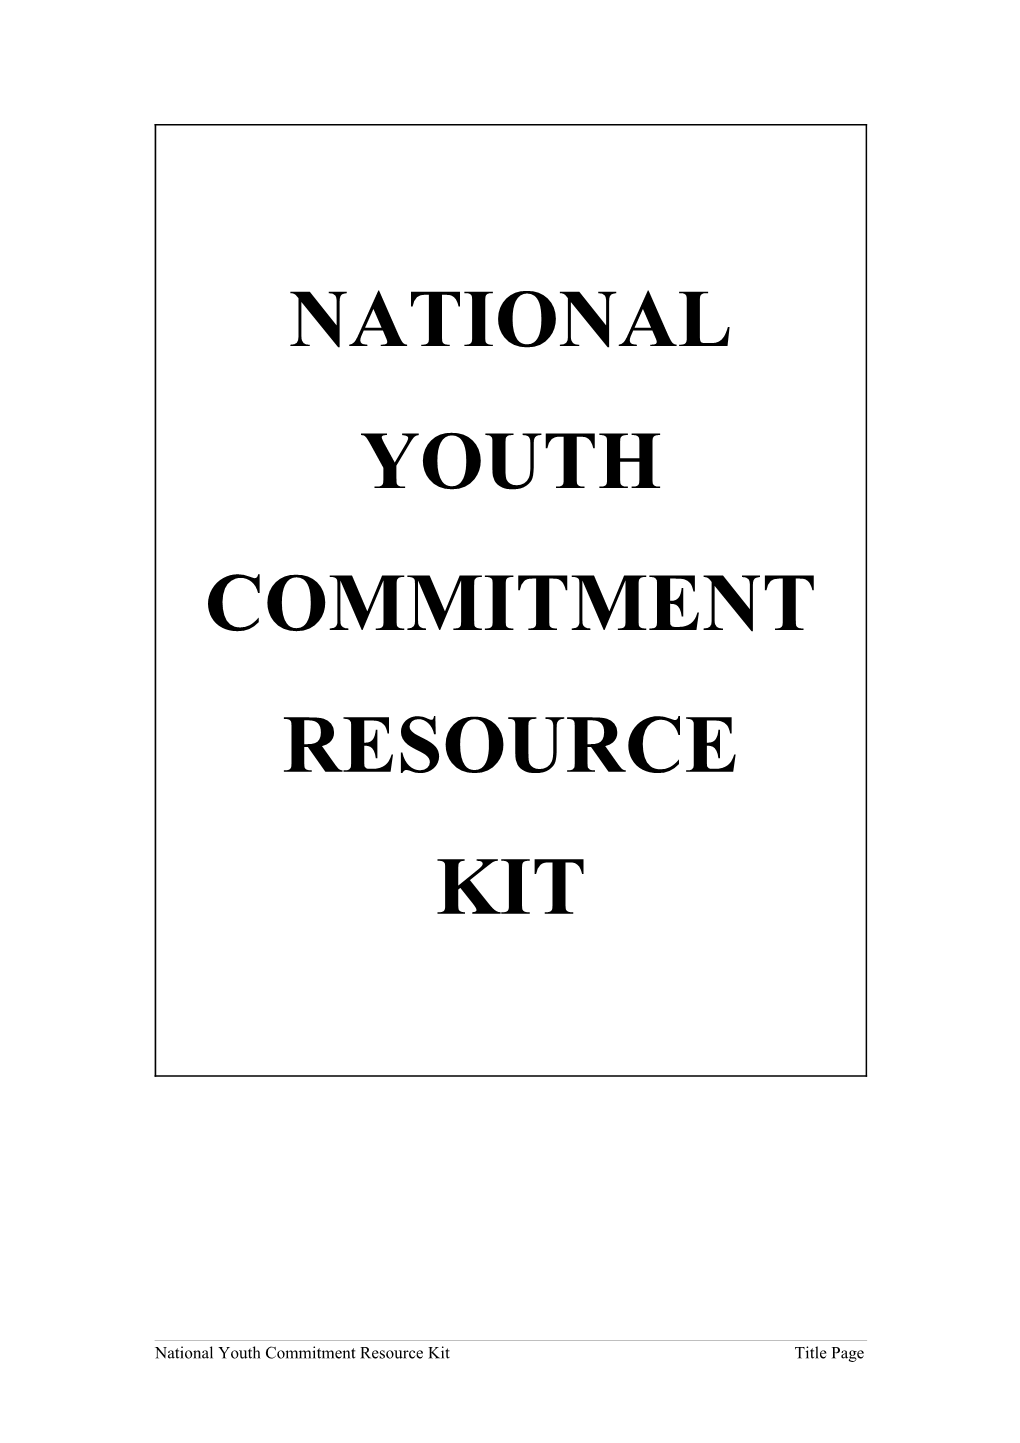 National Youth Commitment Resource Kit